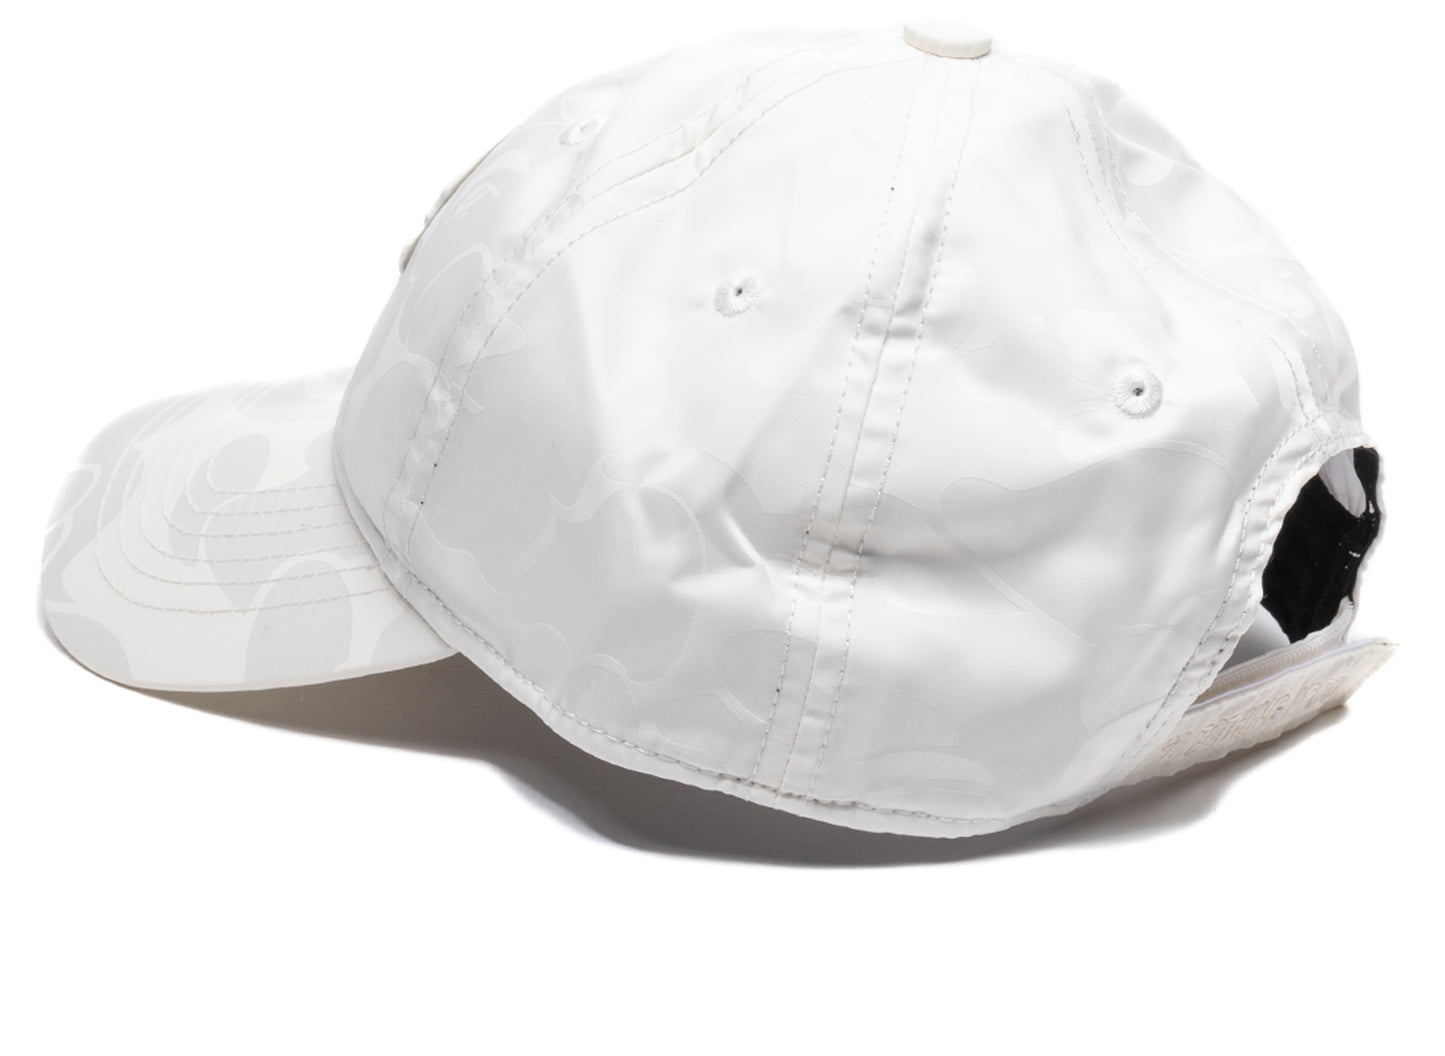 A Bathing Ape Tonal Solid Camo Cap in Ivory